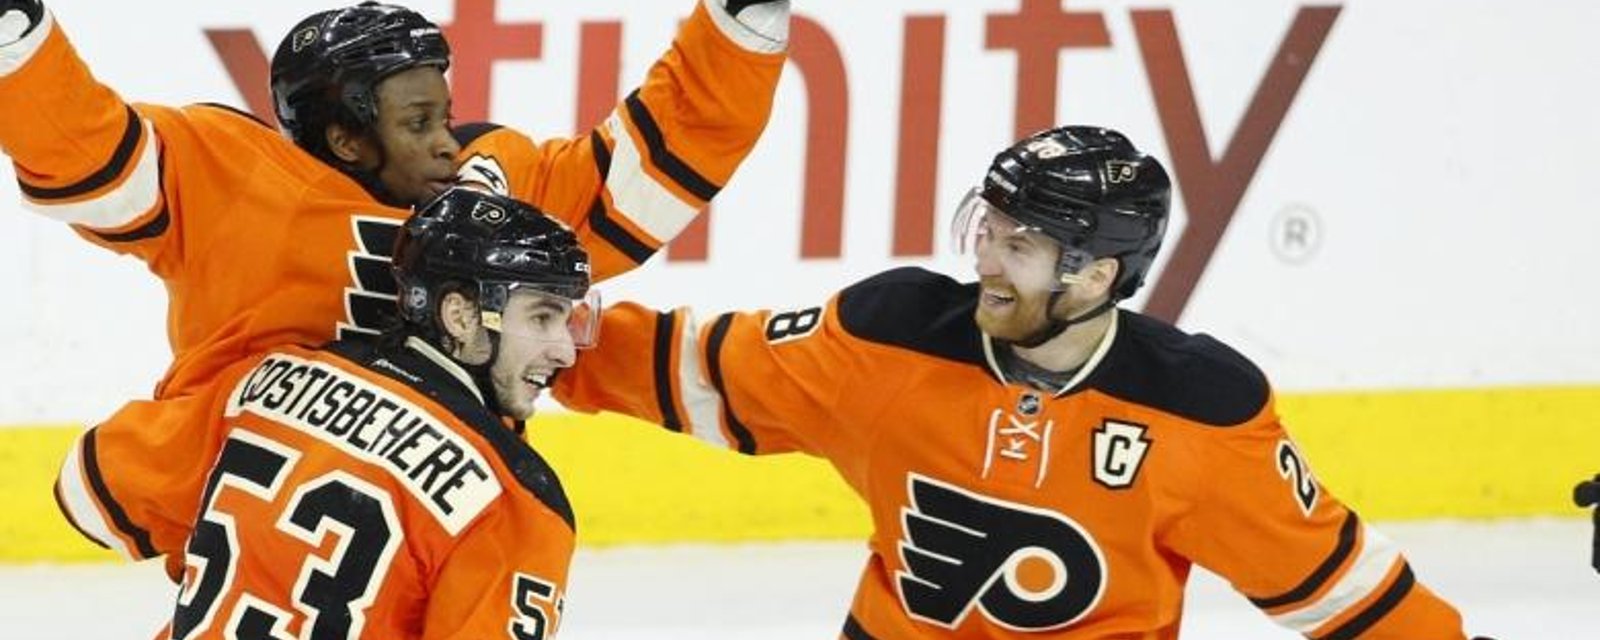 Opérations chirurgicales importantes pour Giroux et Gostisbehere! 